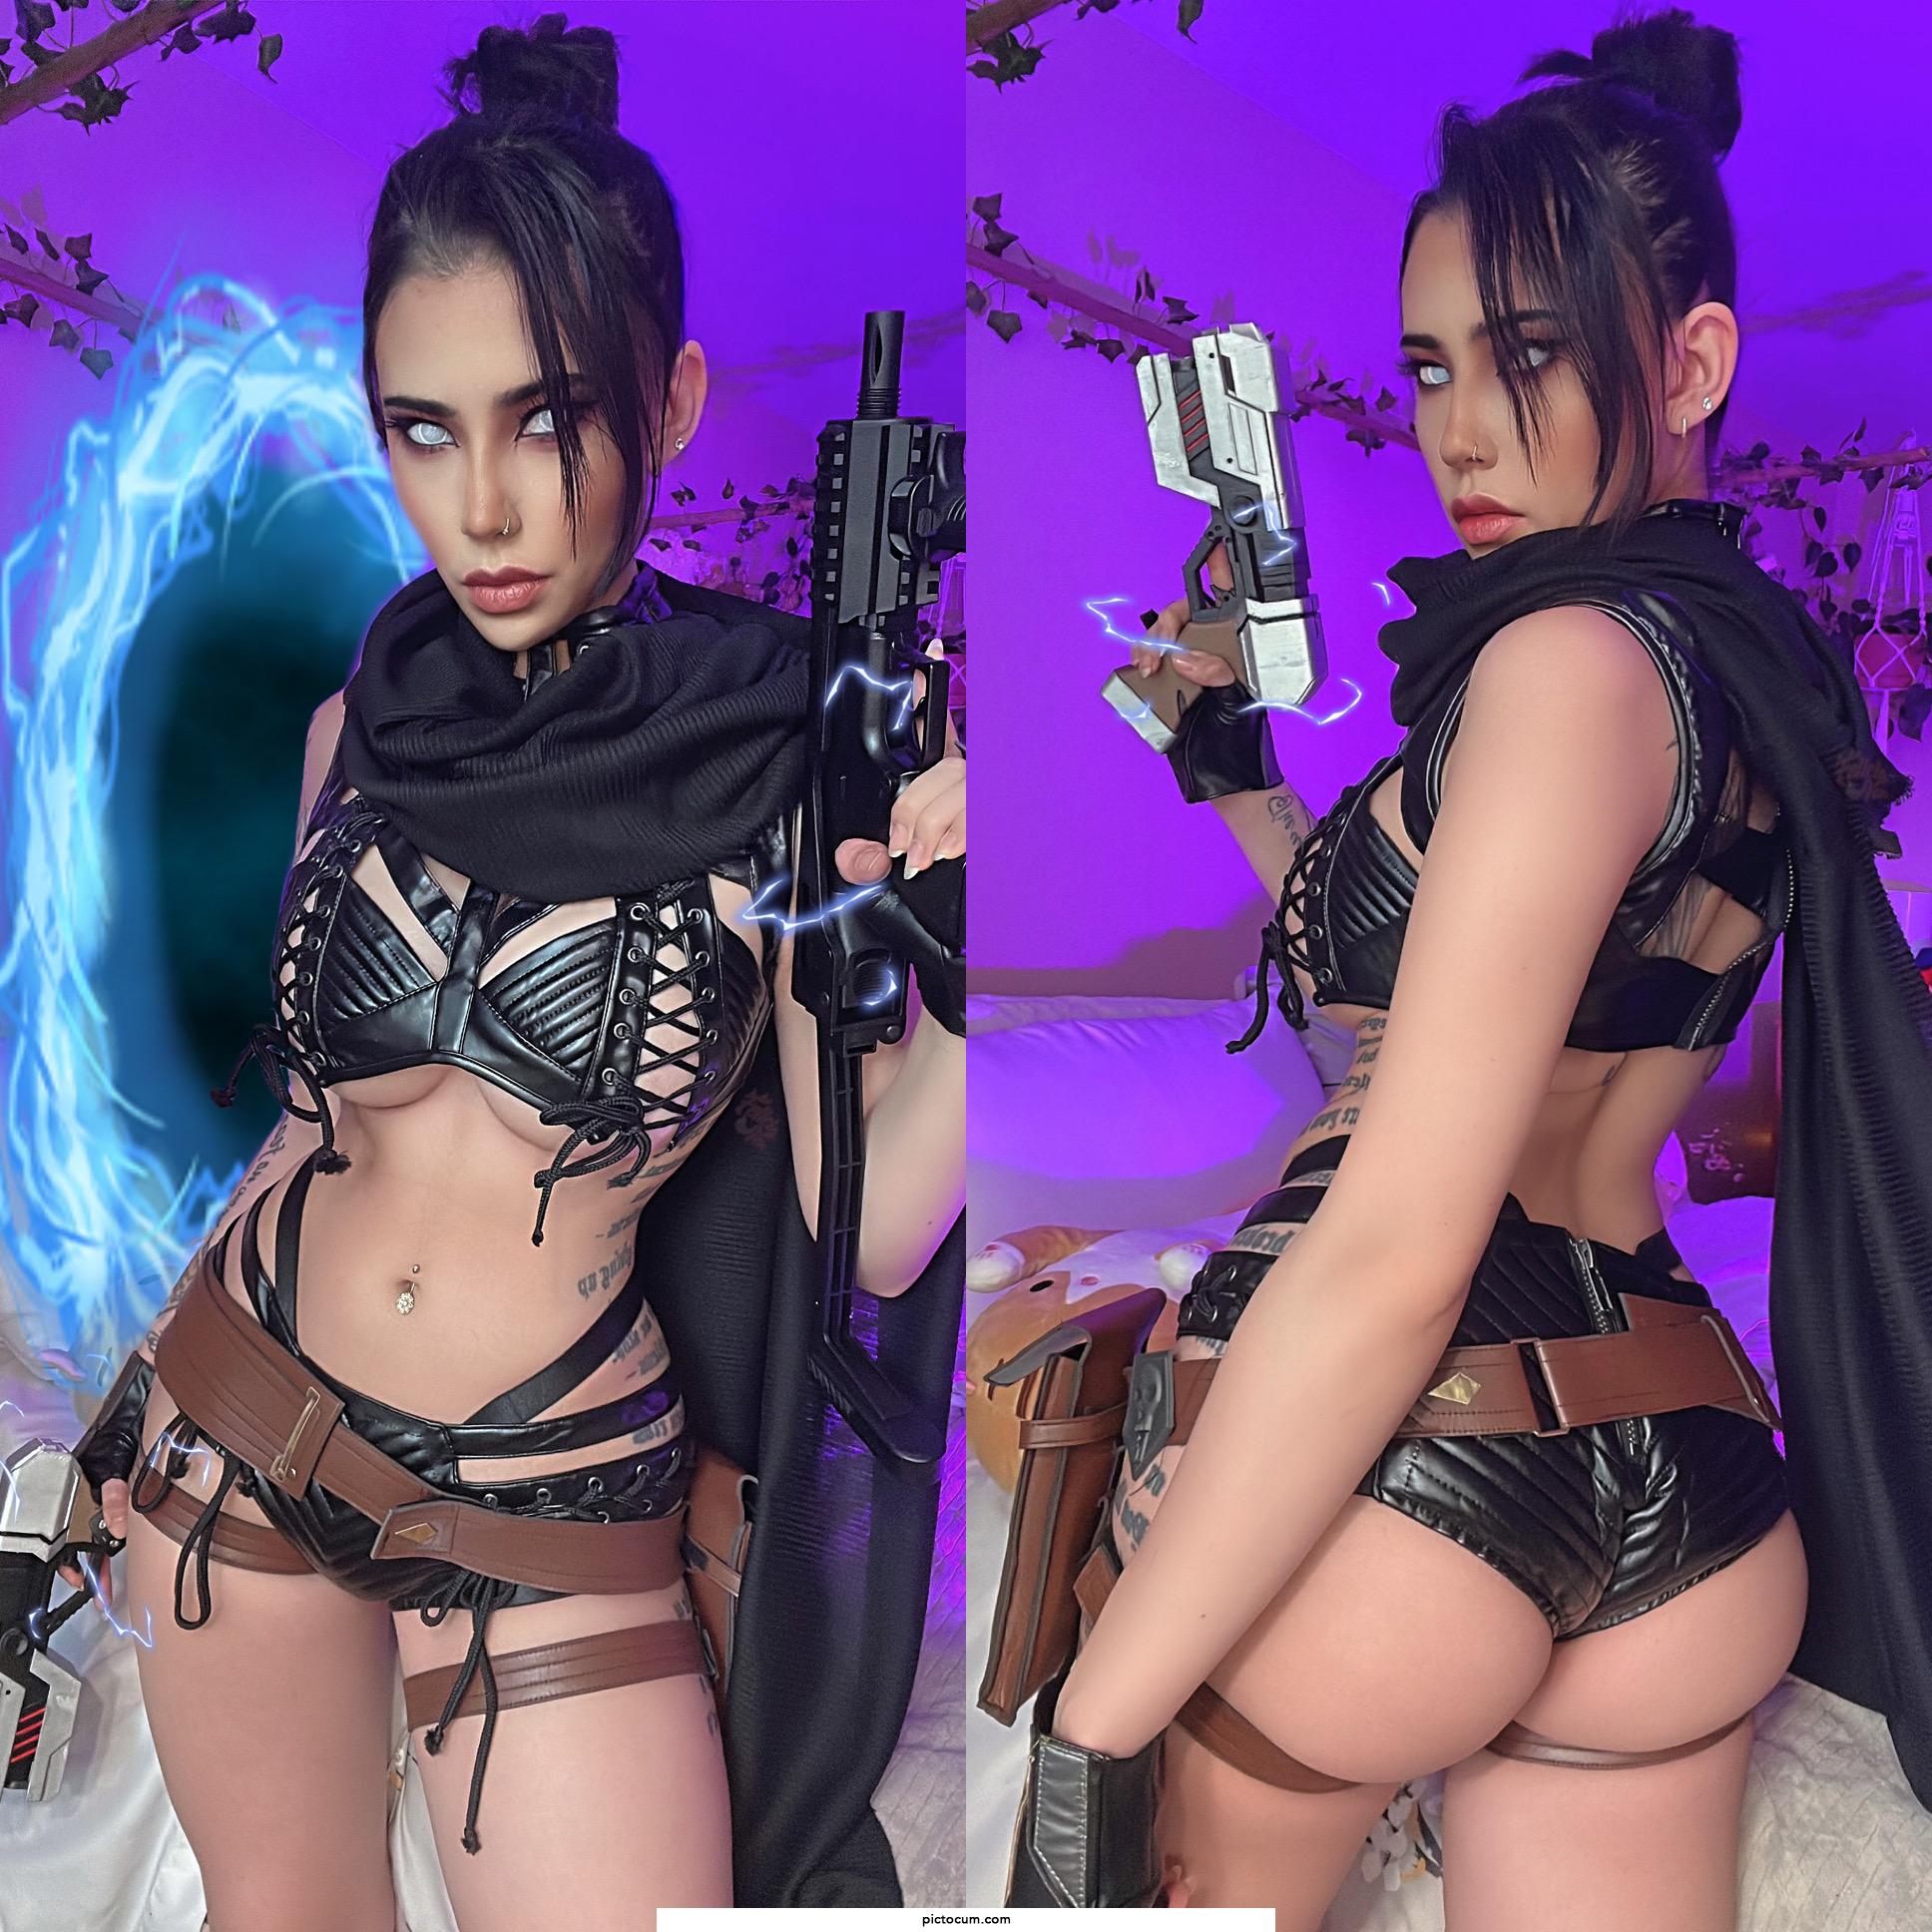 Wraith boudoir closet cosplay from Apex Legends by Felicia Vox